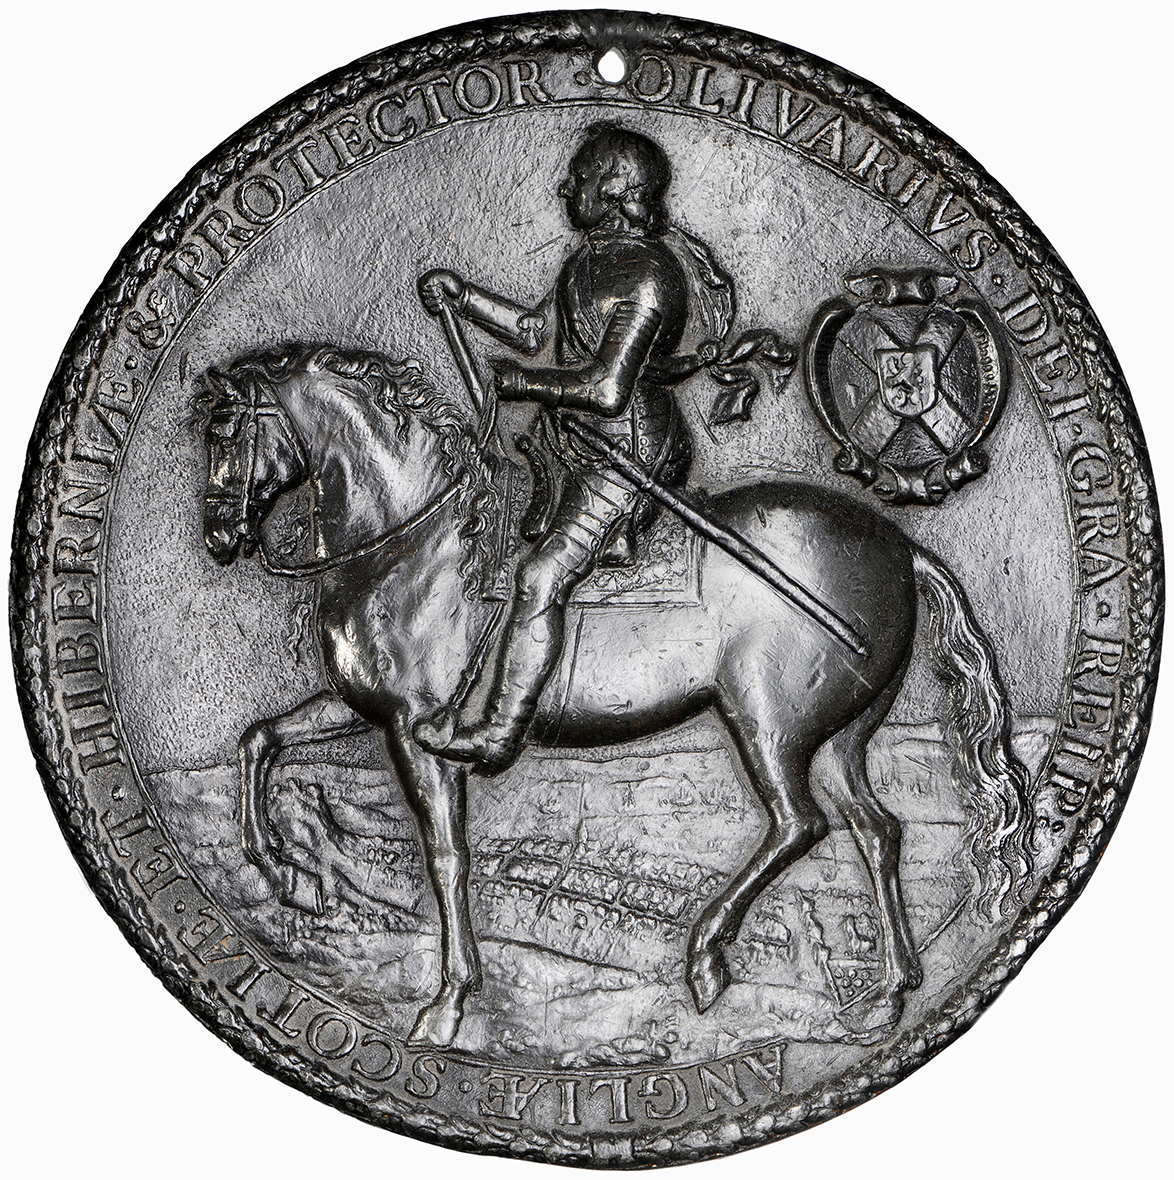 Commonwealth, Oliver Cromwell Uniface Lead Seal, 1653-58